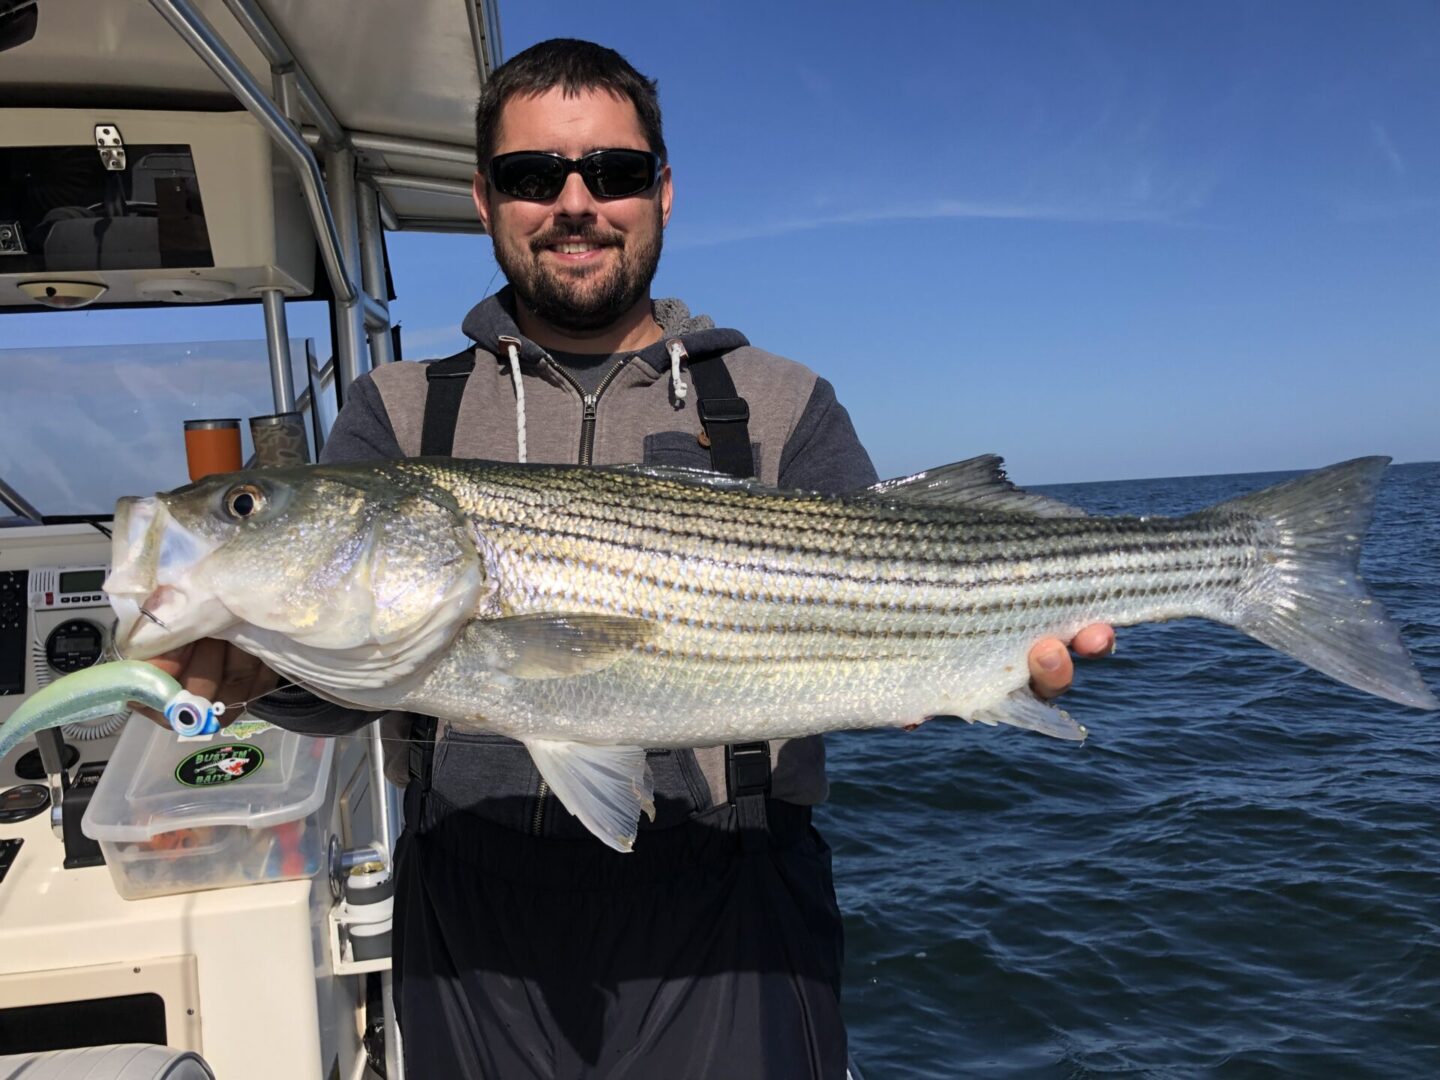 A man holding a striped bass on the boat.